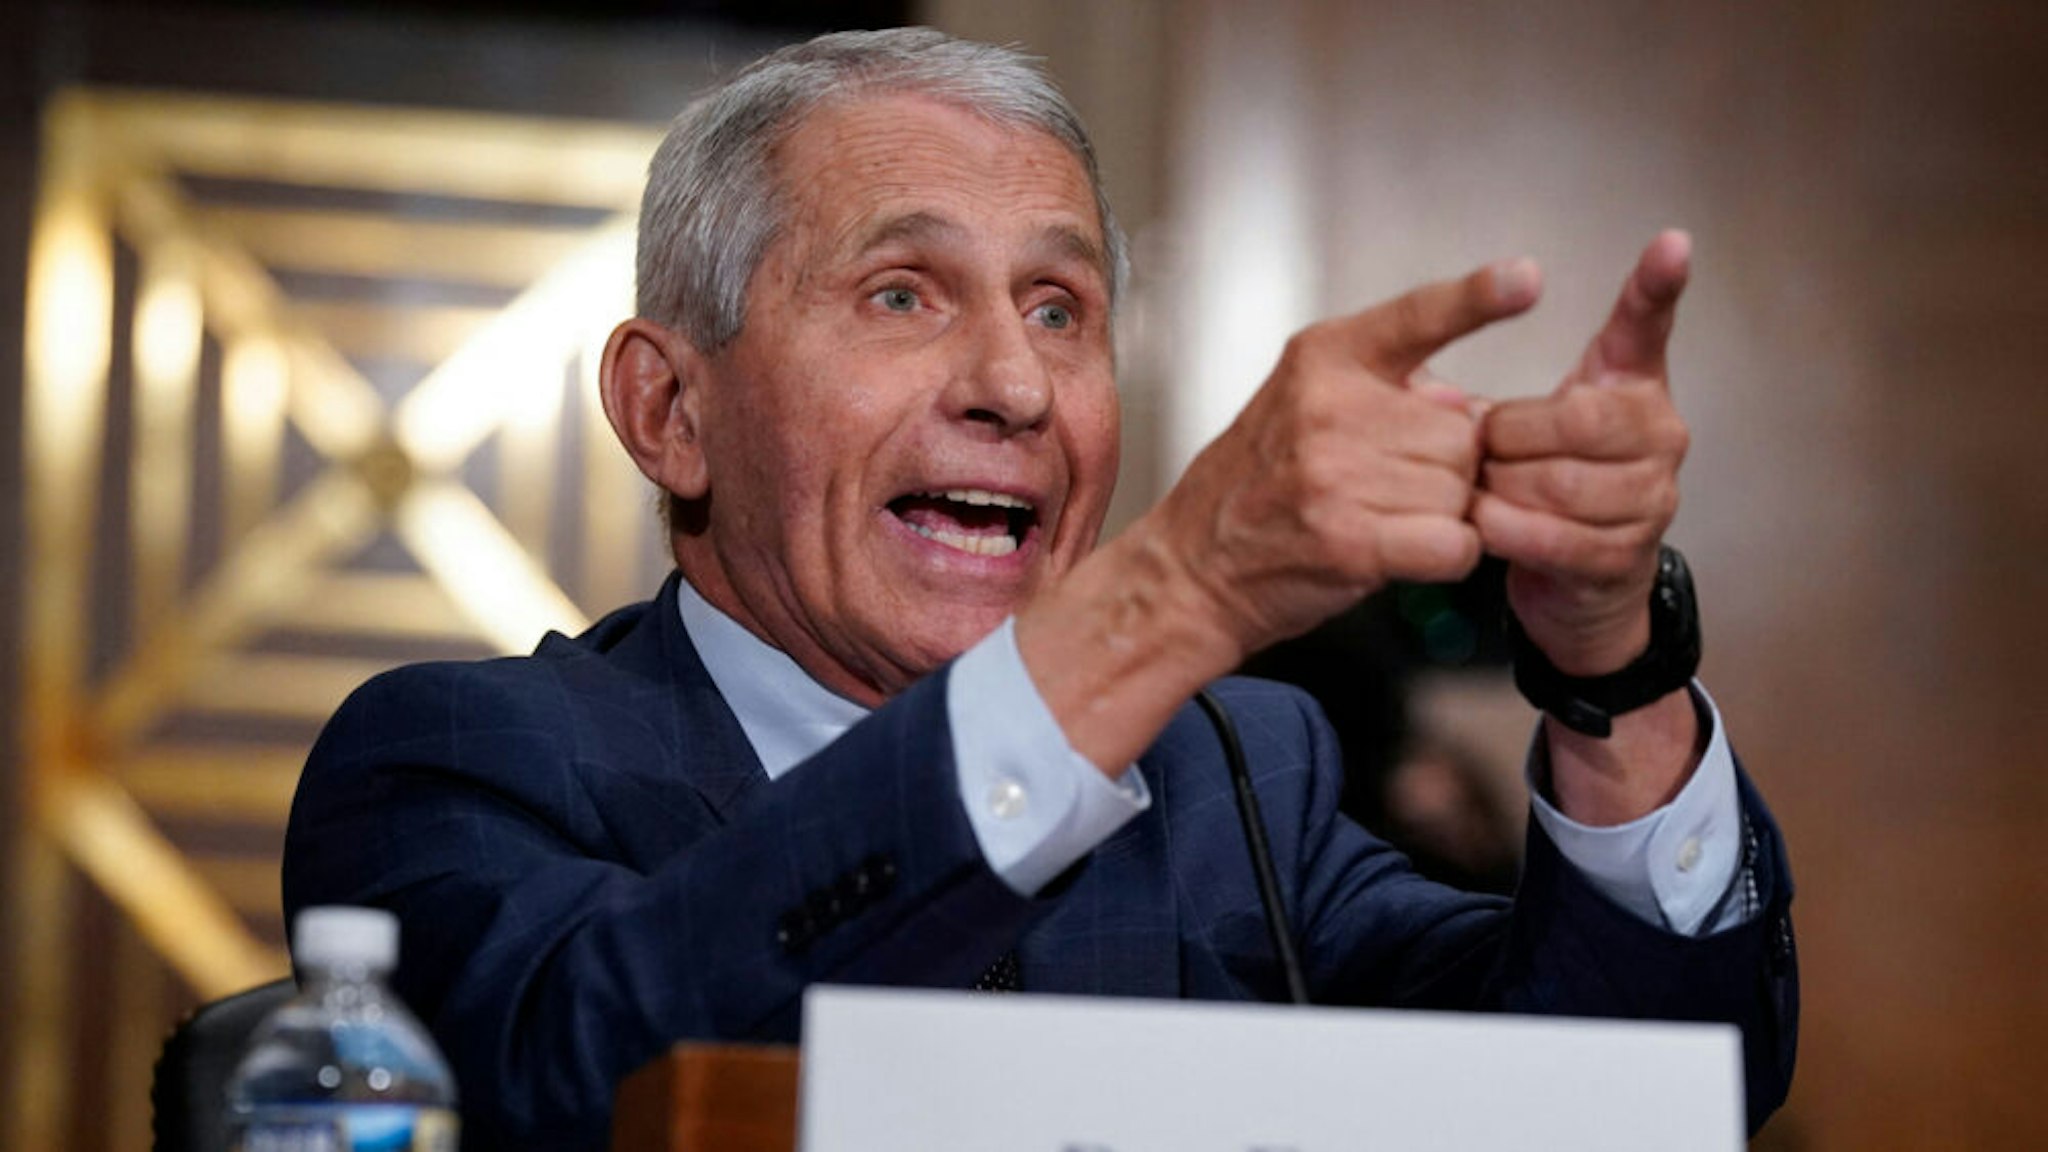 Dr. Anthony Fauci responds to accusations by Sen. Rand Paul, R-KY, as he testifies during the Senate Health, Education, Labor, and Pensions Committee hearing on Capitol Hill in Washington,DC on July 20, 2021.